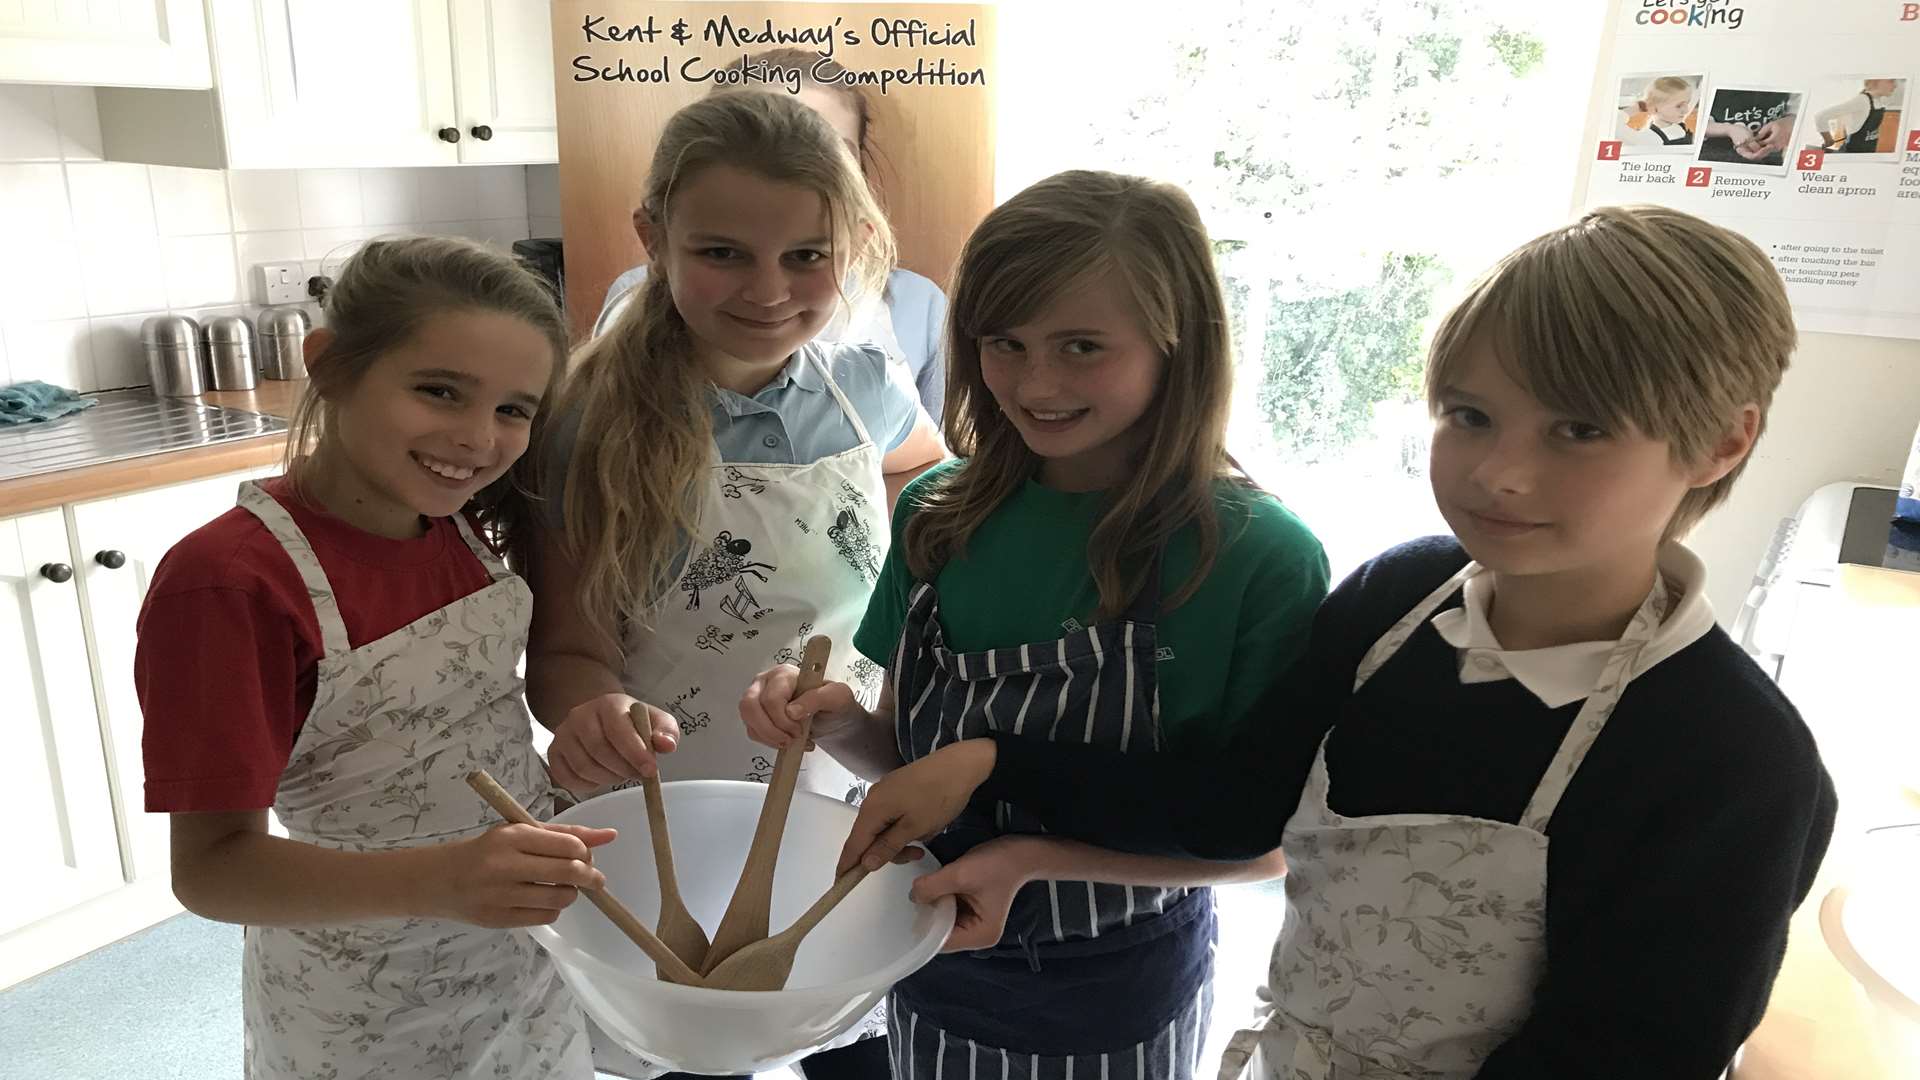 Tallis Pilbeam-Carter, Antonin Corcoran, Summer Graham and Alice Williams, all 10 years old from Petham Primary School, get cooking.